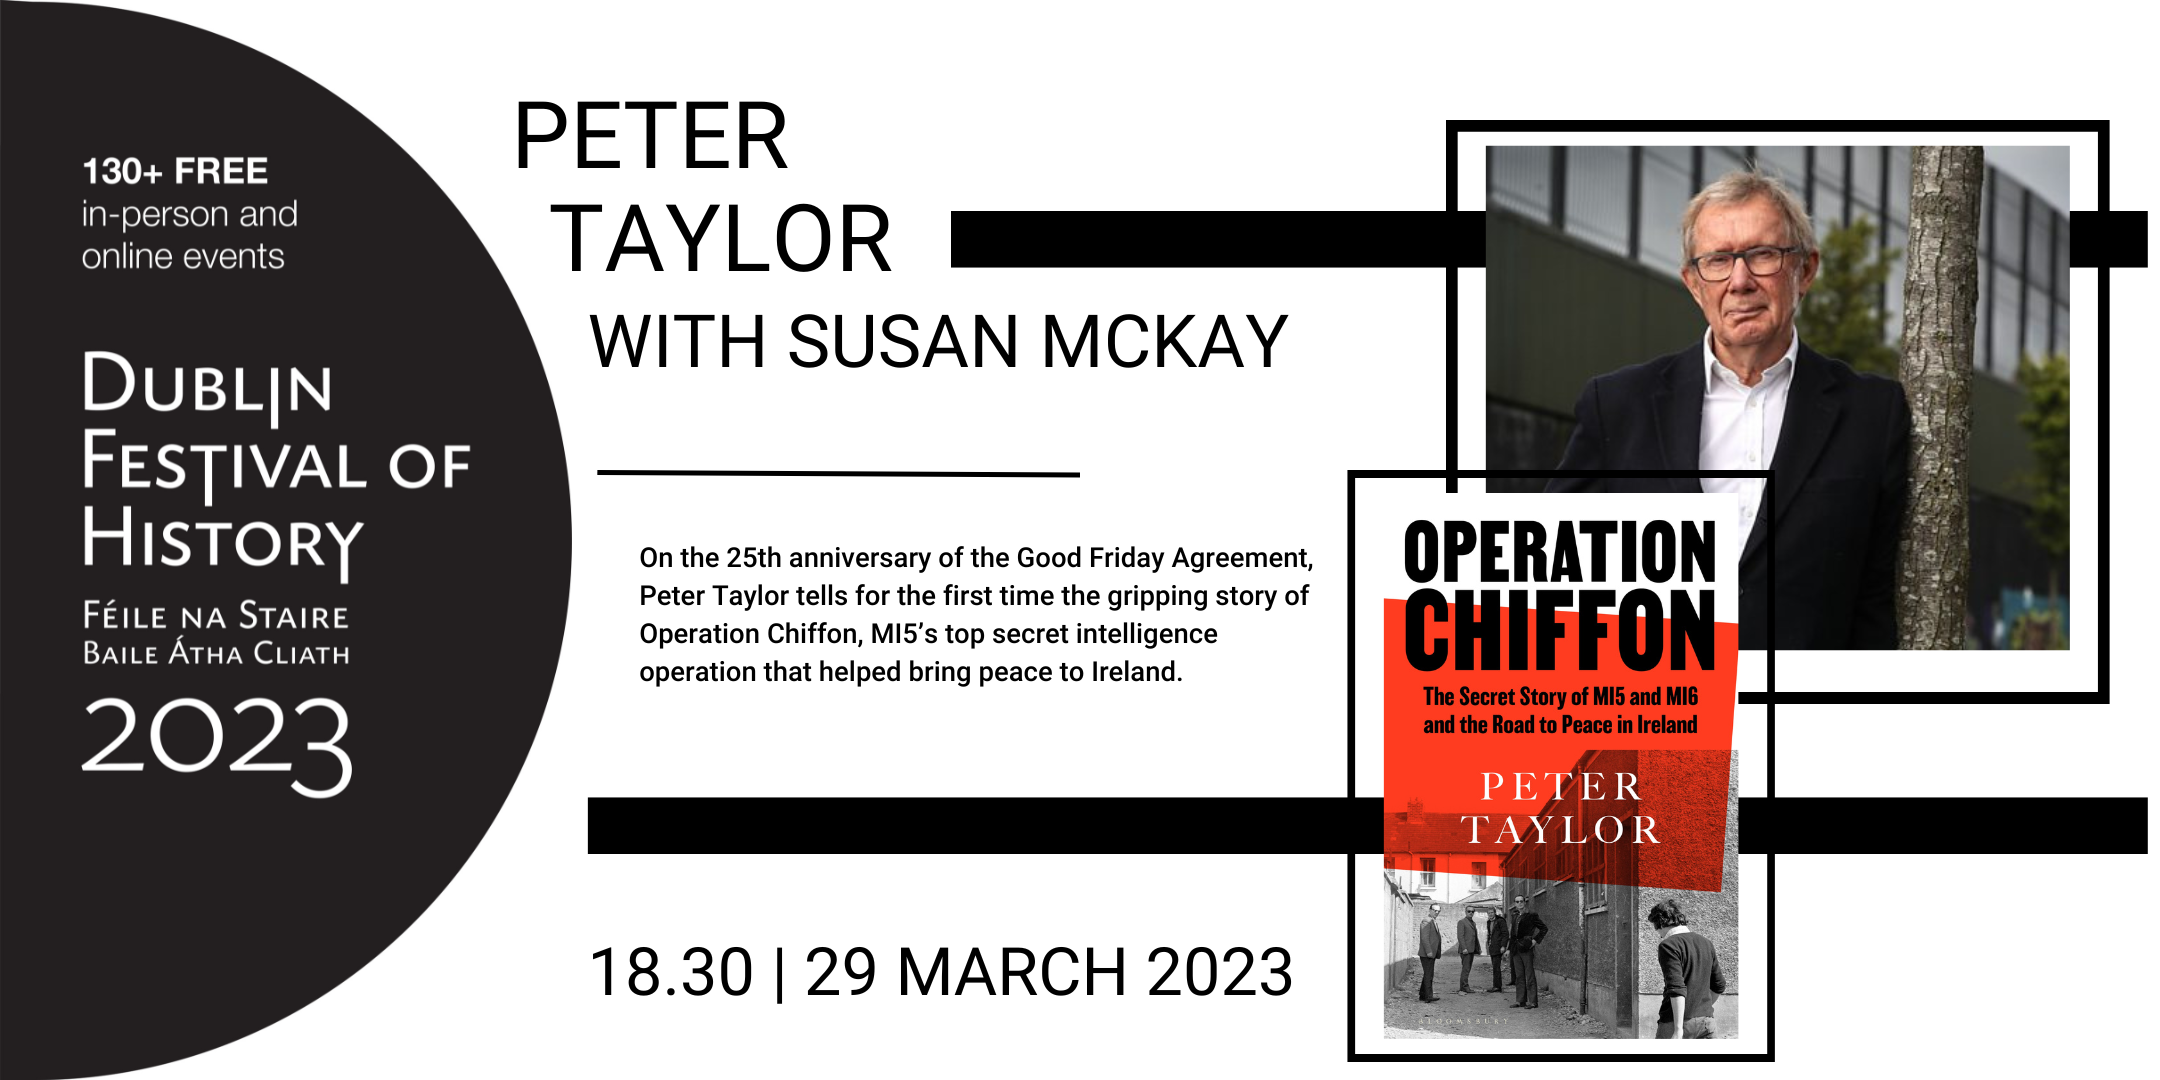 Image shows a photo of Peter Taylor and the book cover for Operation Chiffon; The Secret Story of MI5 and MI6 and the Road to Peace in Ireland.